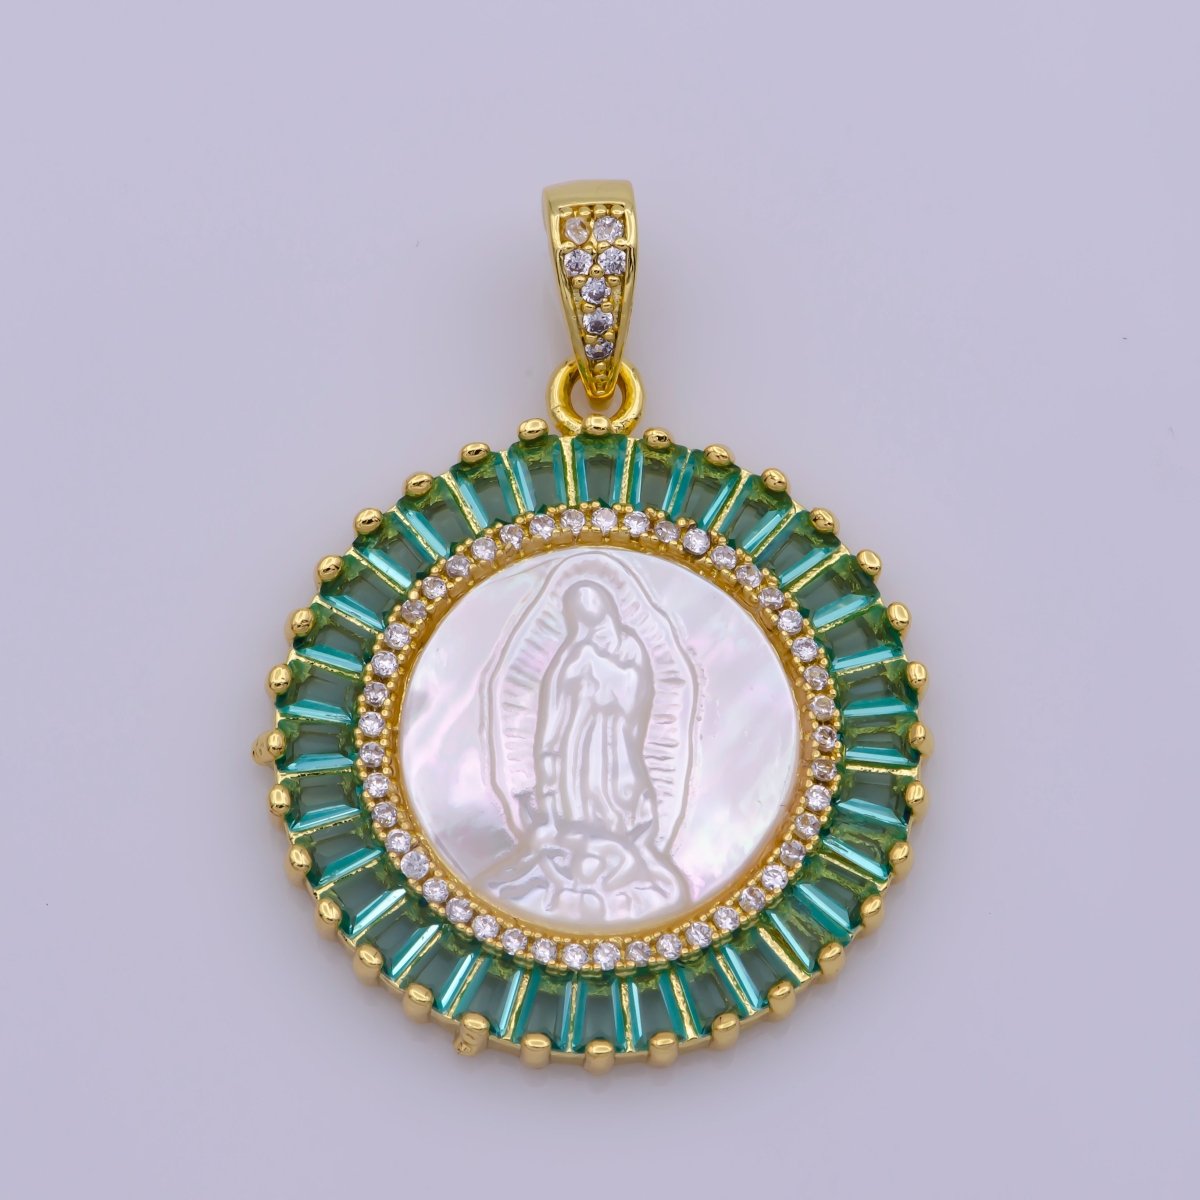 Gold Filled Virgin Mary Pendant Pearl Lady Guadalupe Medallion Charm Necklace Pink Cubic Micro Pave Cz for Religious jewelry making supply N-1407 I-109 - DLUXCA